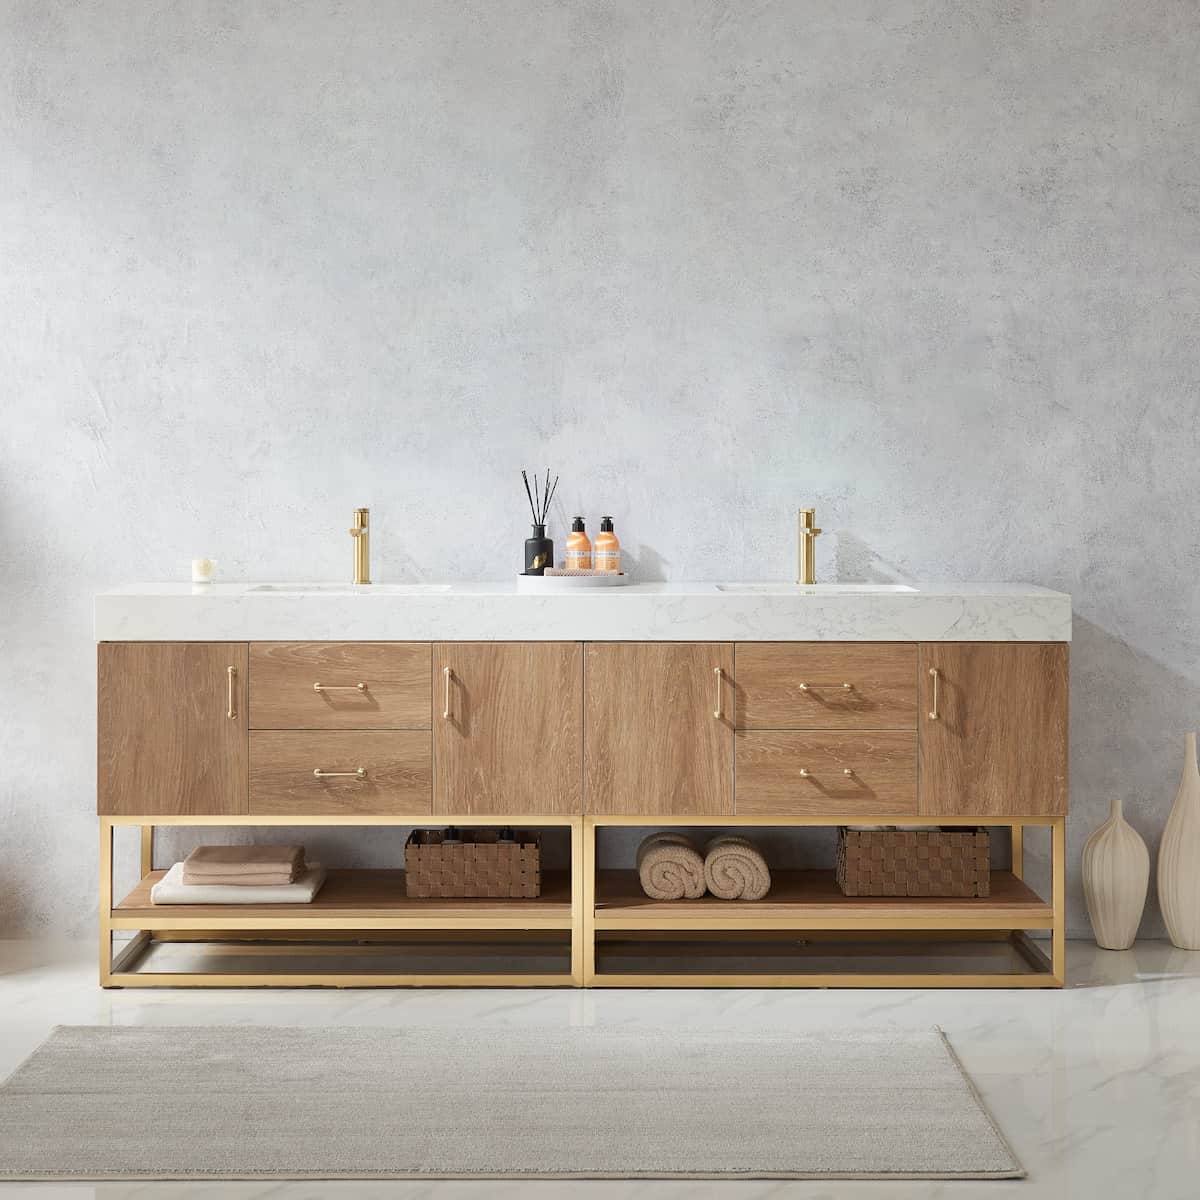 Vinnova Alistair 84 Inch Freestanding Double Vanity in North American Oak and Brushed Gold Frame with White Grain Stone Countertop Without Mirrors in Bathroom 789084-NO-GW-NM